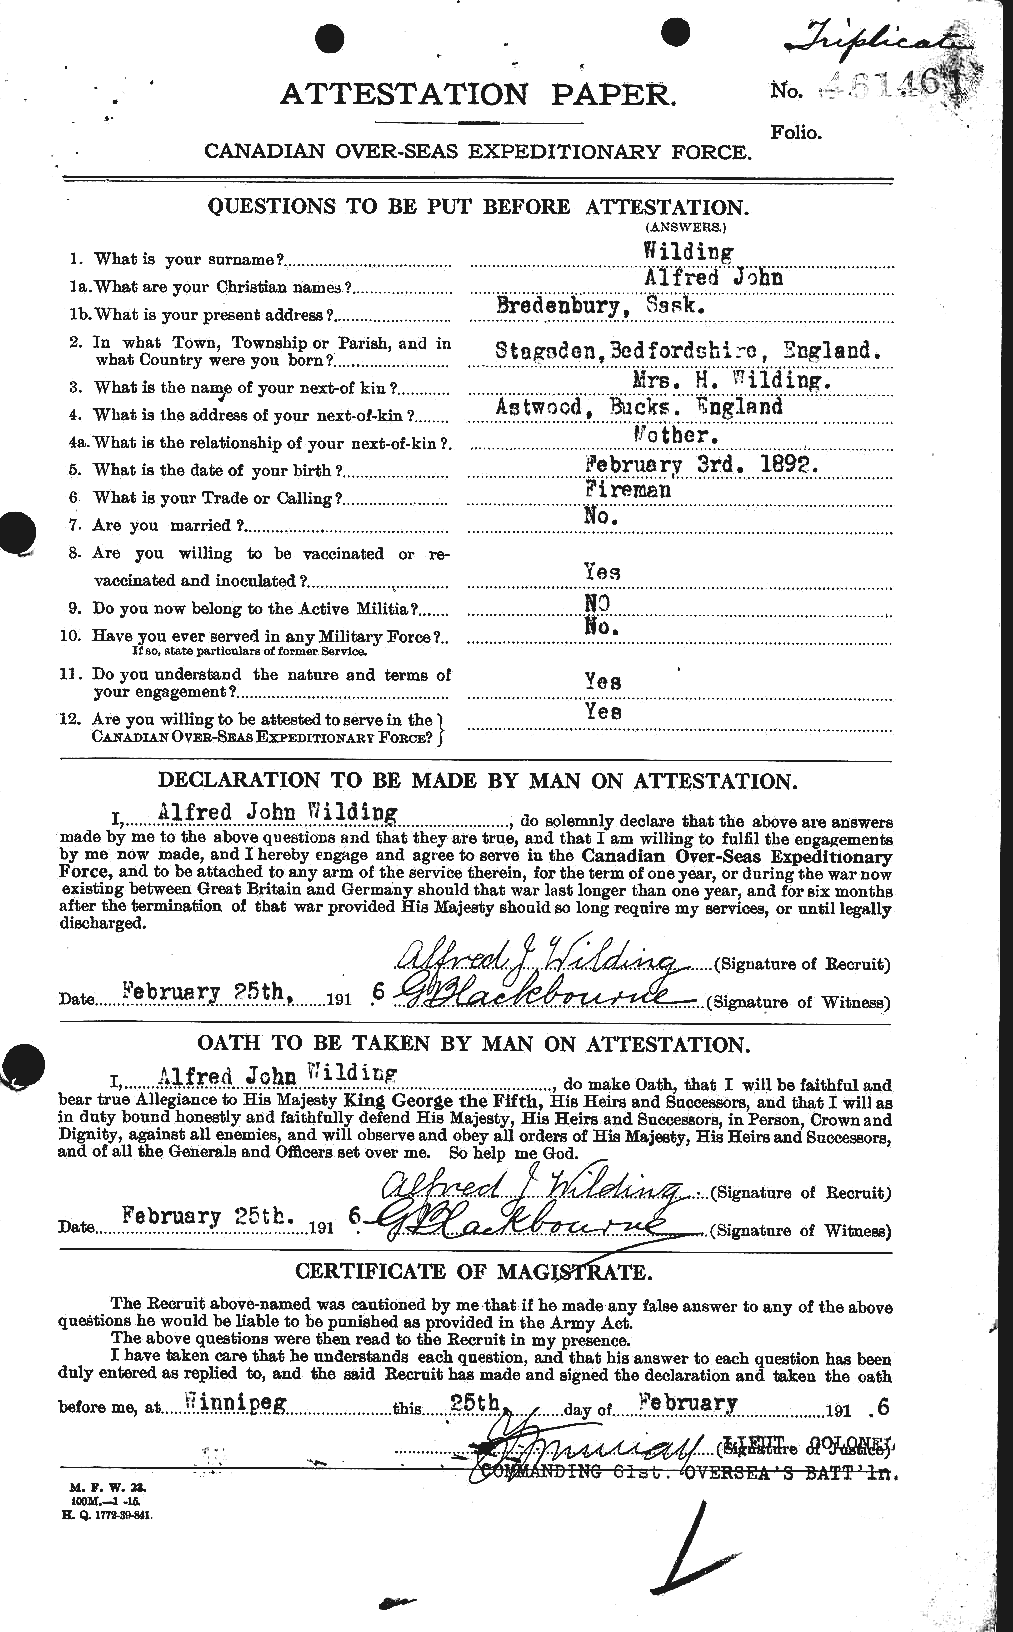 Personnel Records of the First World War - CEF 680084a